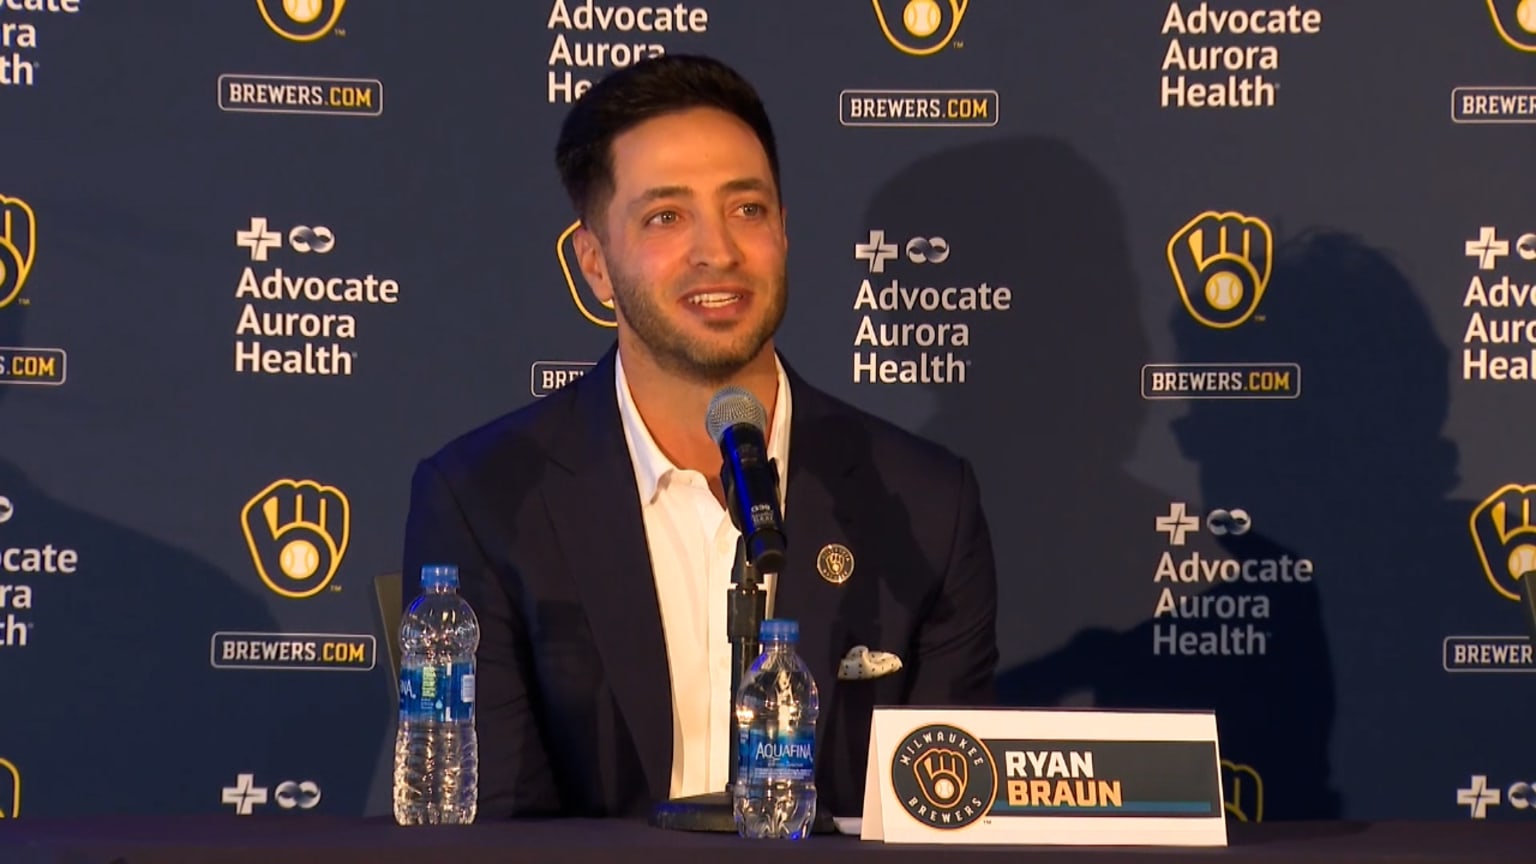 Ryan Braun officially announces his retirement from baseball